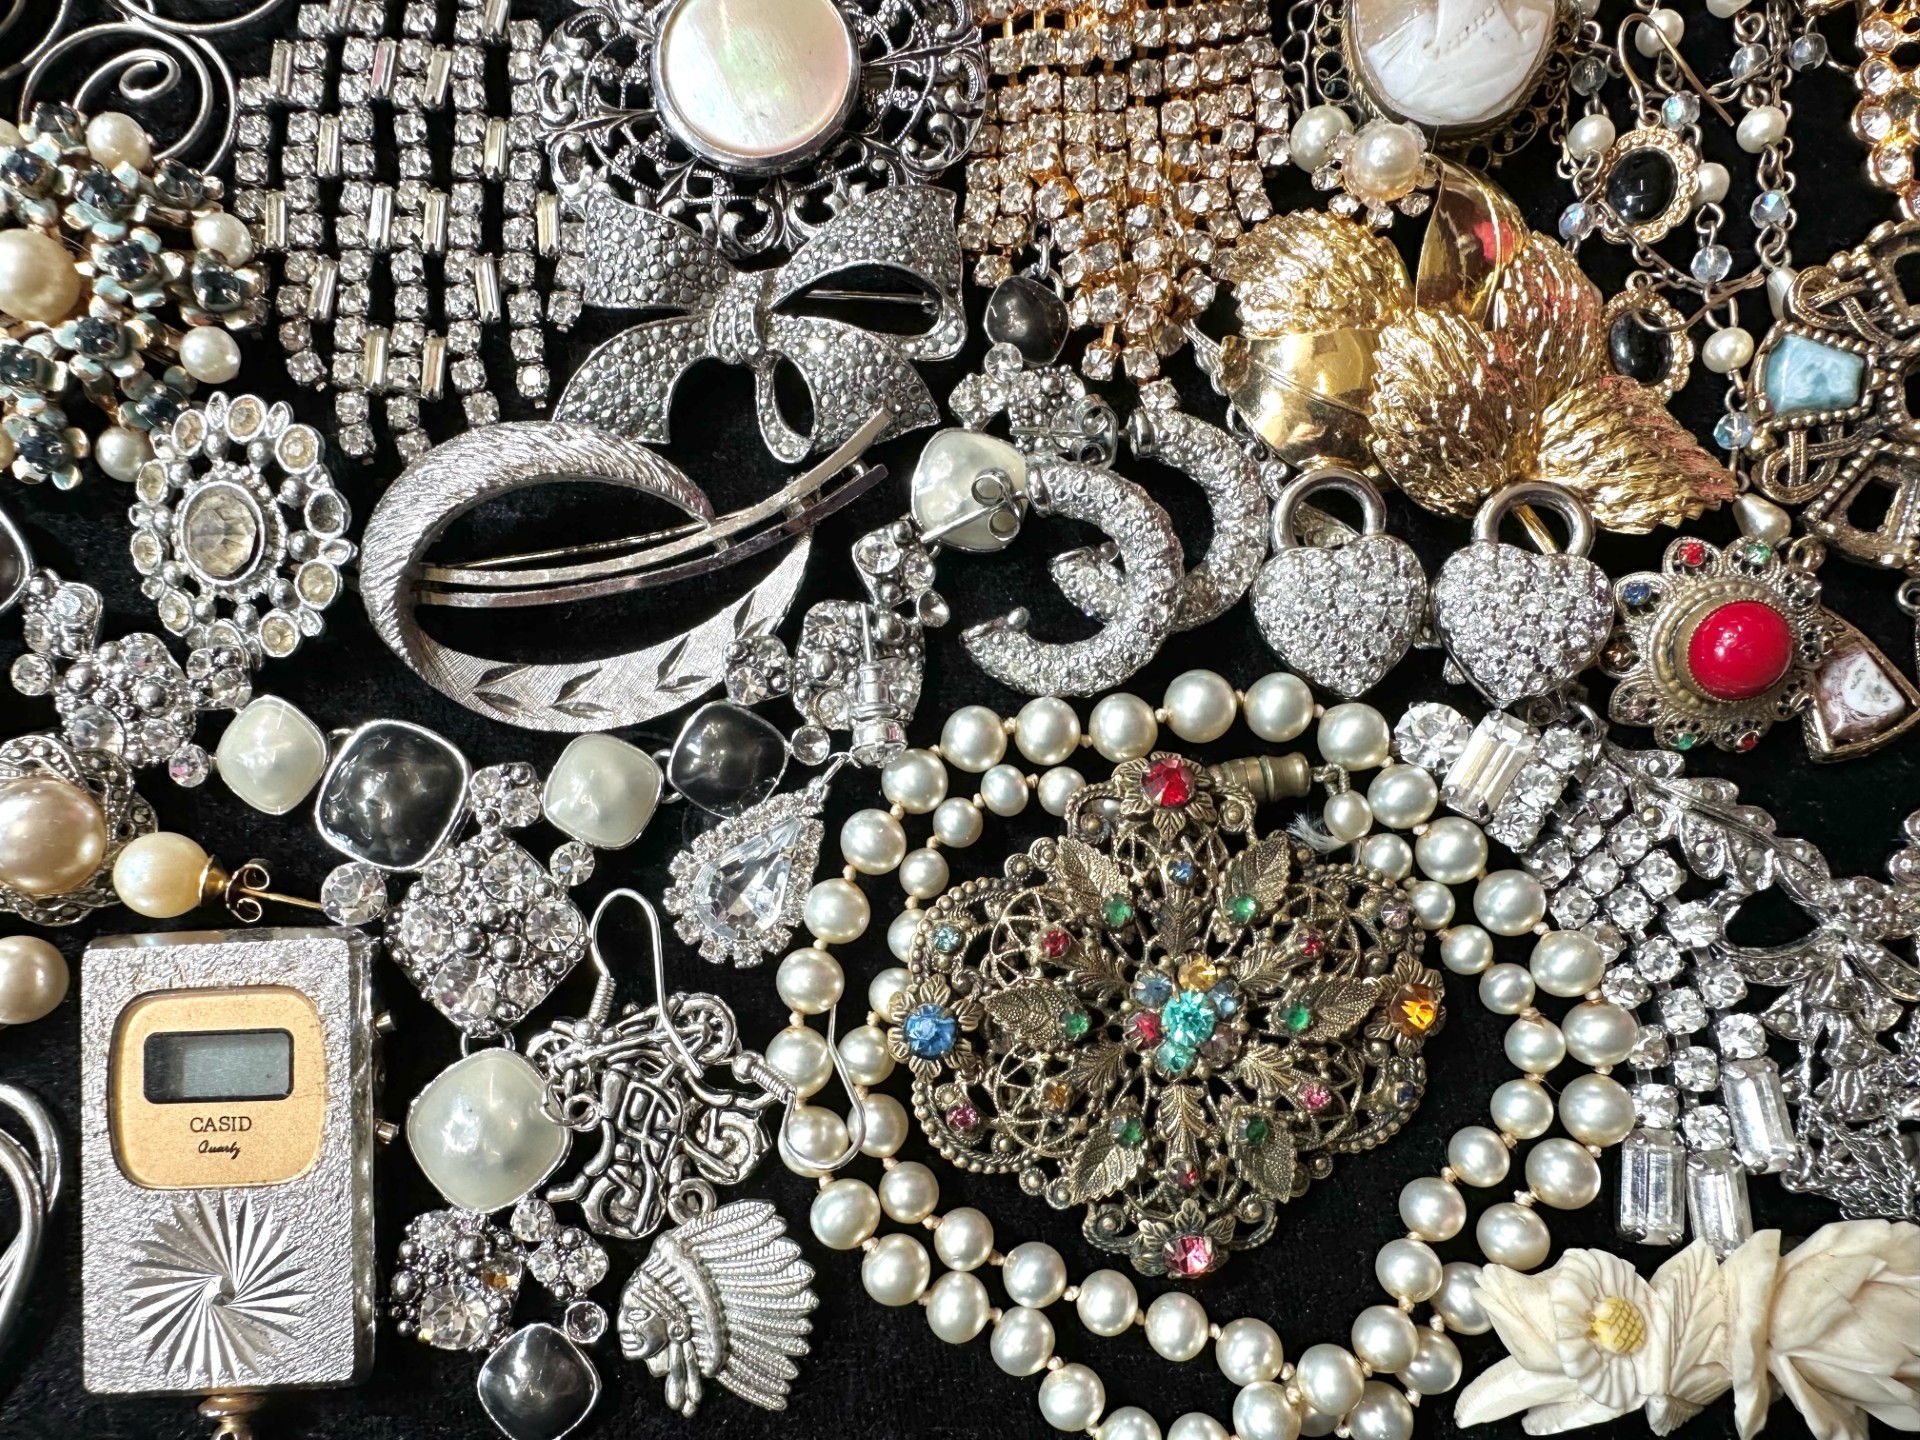 Collection Of Costume Jewellery - To Include Brooches, Earrings, Necklaces Stones, A Spoon Etc... - Image 2 of 4